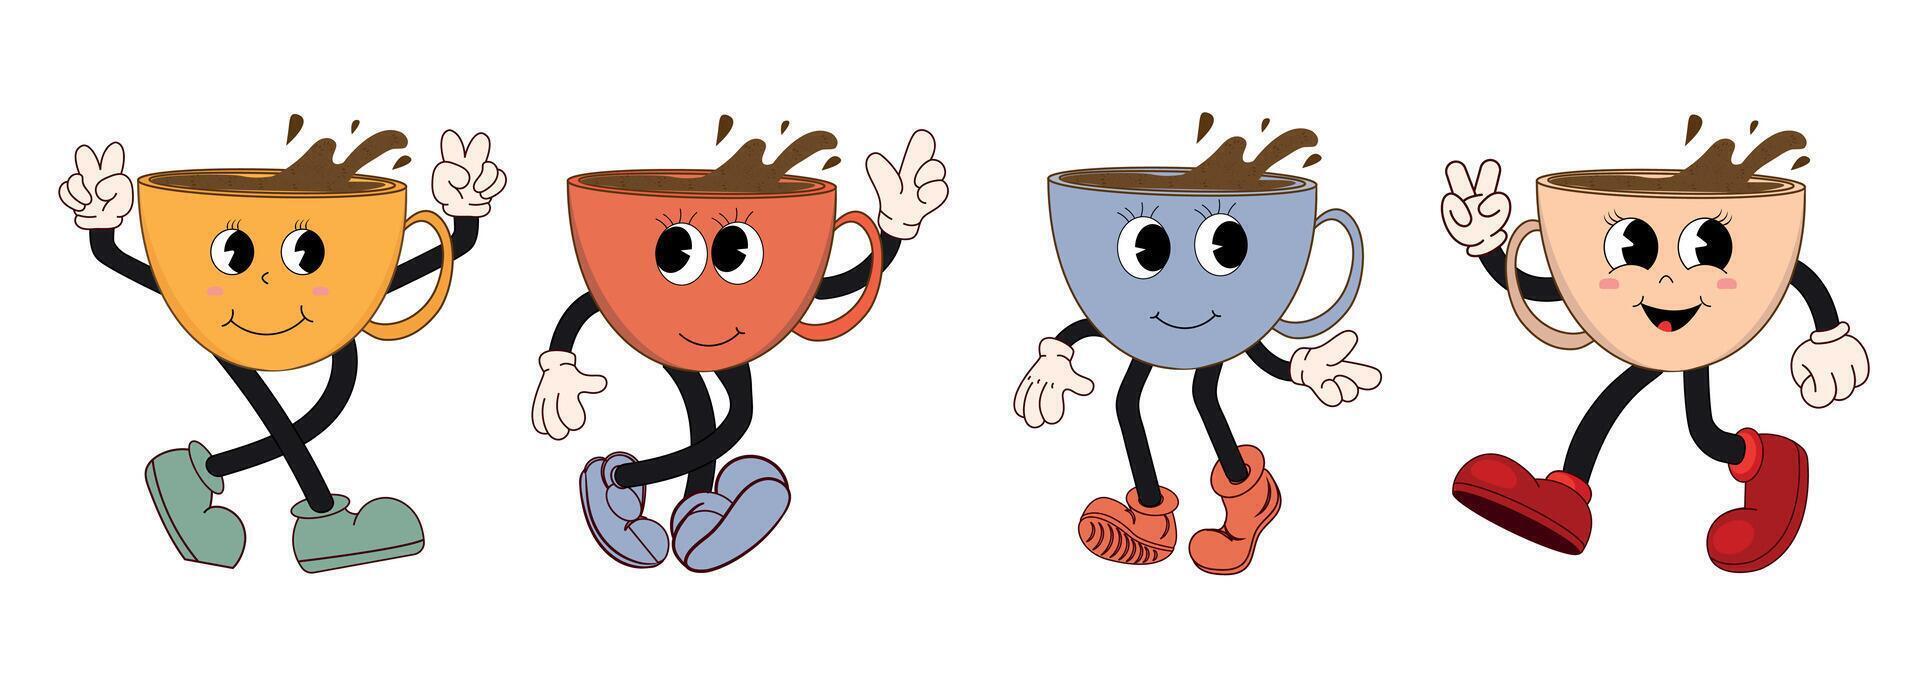 Retro cartoon set of funny coffee characters in groovy style, cute mascot. Vintage coffee illustration. Nostalgia for the 60s, 70s, 80s. vector